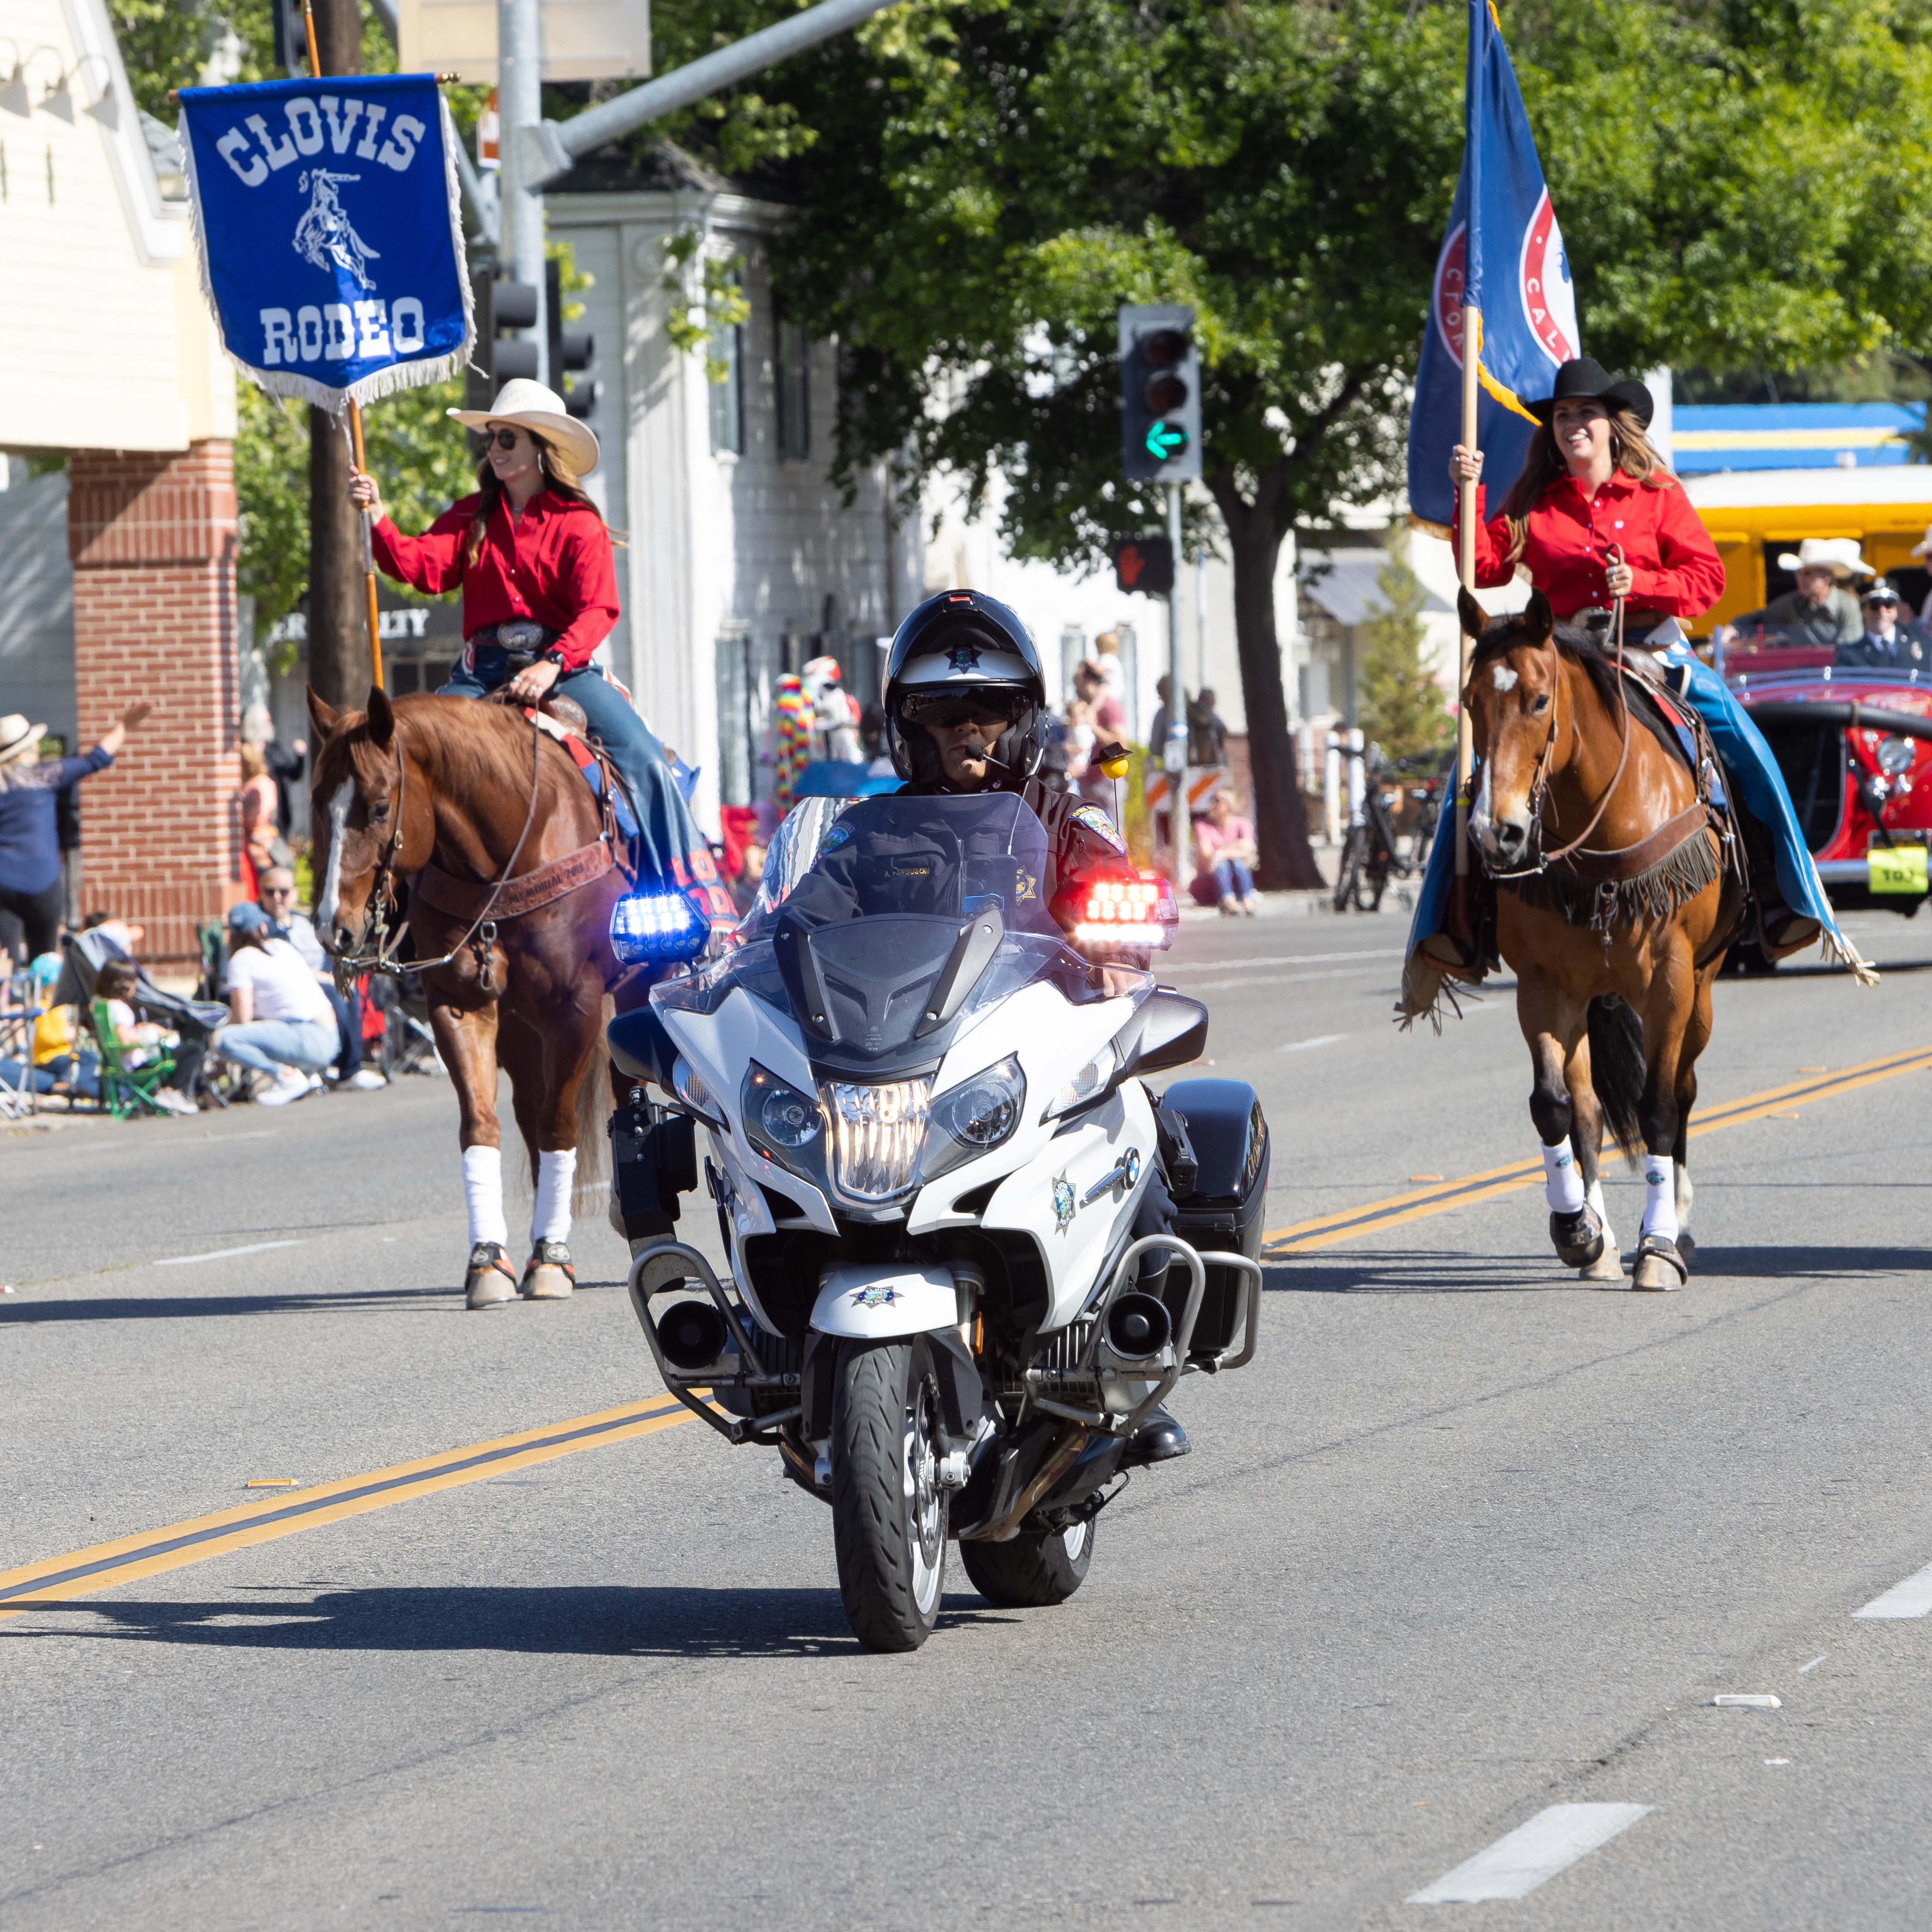 Clovis police officer on motorcycle escorting the Clovis Rodeo parade